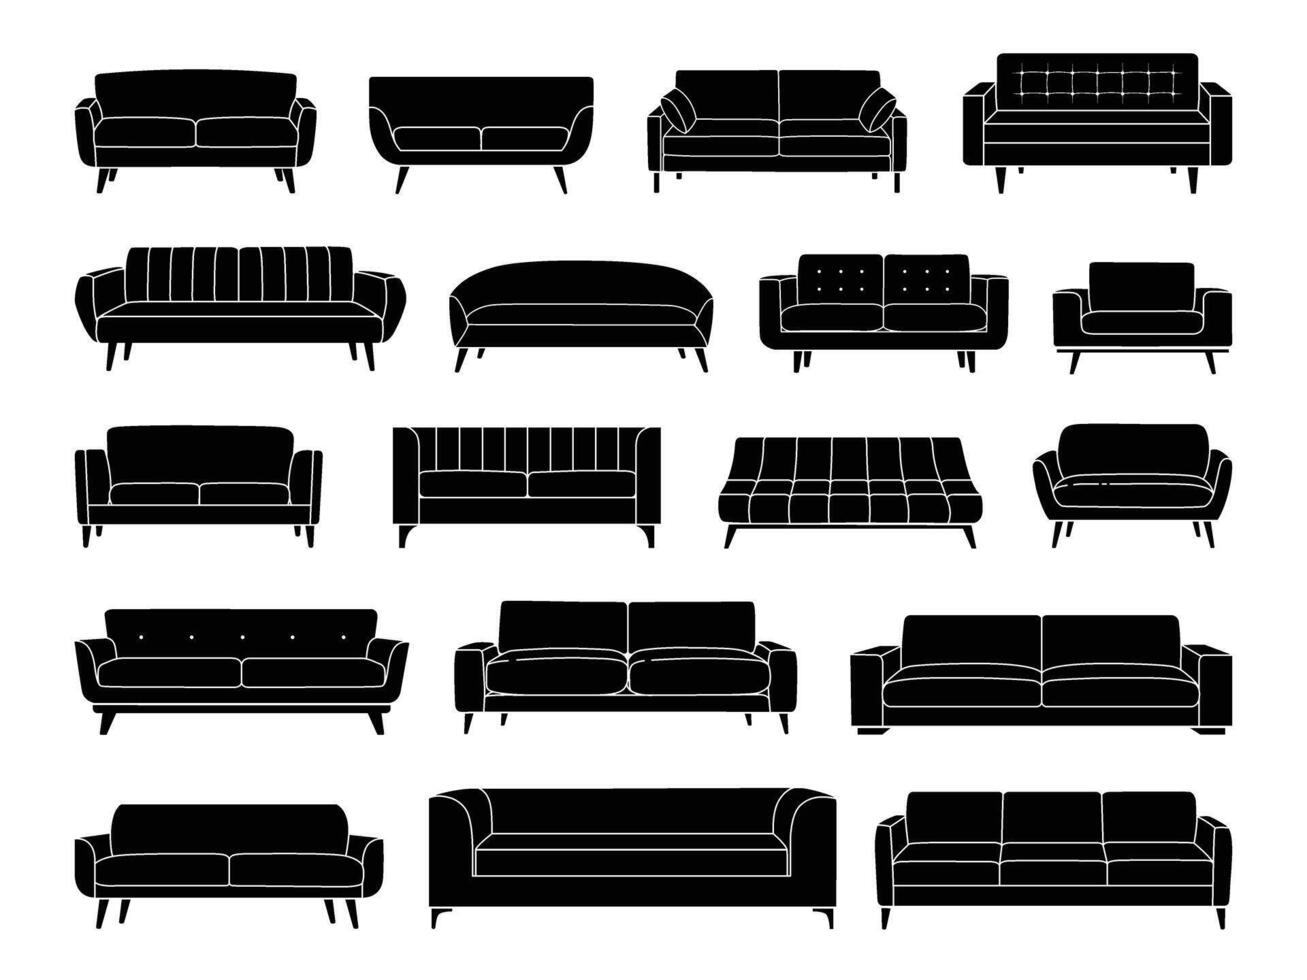 Sofas, couches, and armchairs silhouette icon set. Modern, comfortable soft furniture collection for cozy home decor design. Flat monochrome vector illustration isolated on white background.